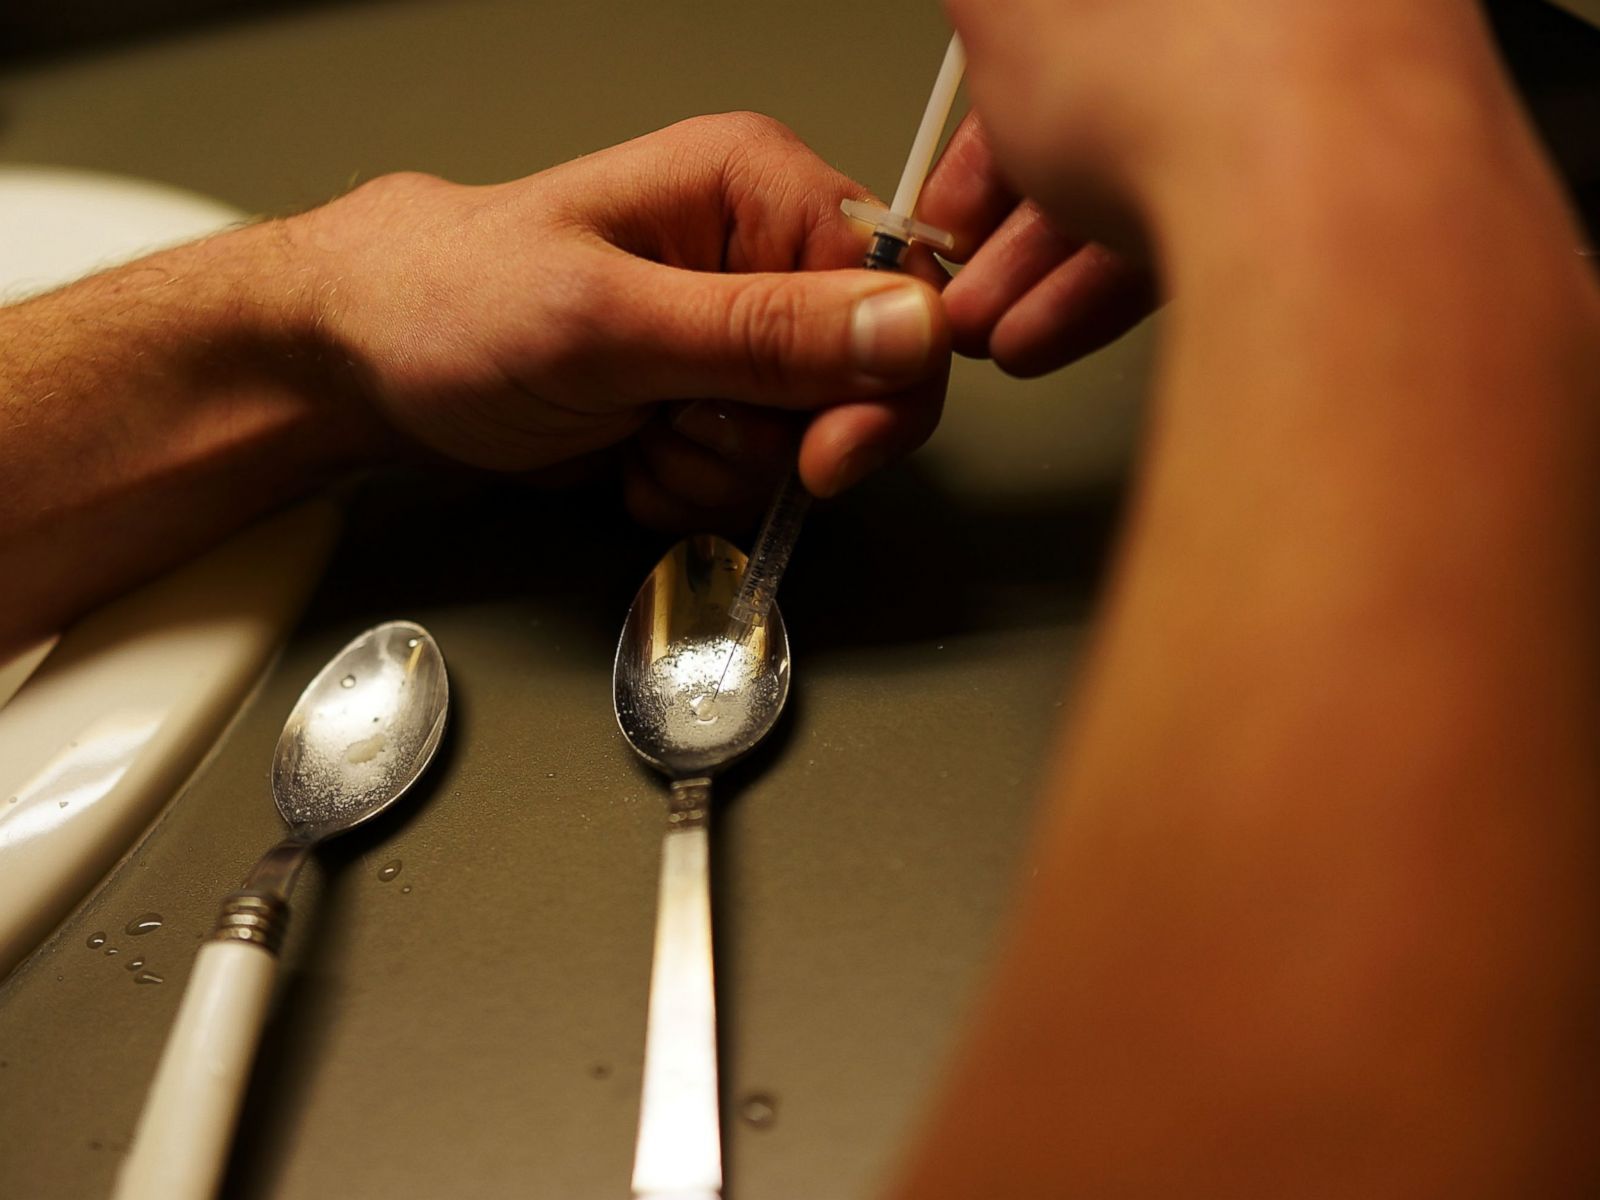 Heroin Across America: ABC News Reports From Around the Country